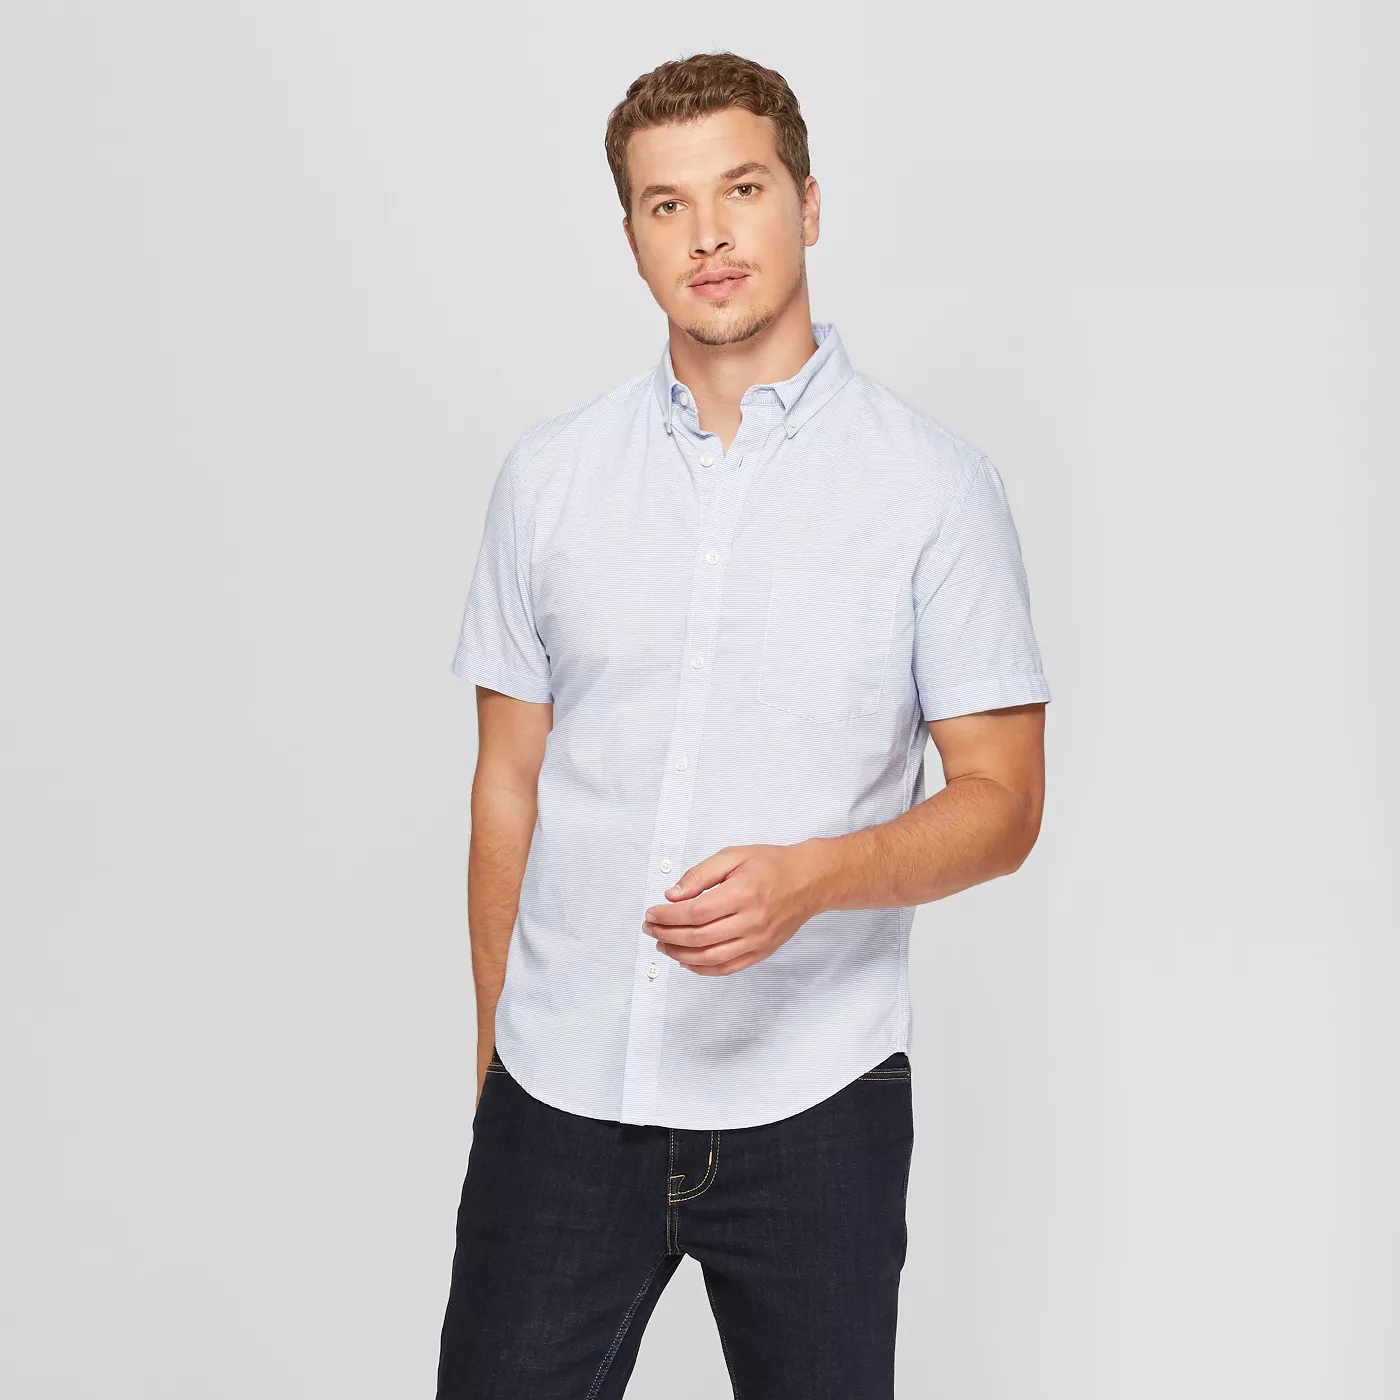 Photo session outfit Men's Short Sleeve Poplin Button-Down Shirt - Goodfellow & Co Amparo Blue 